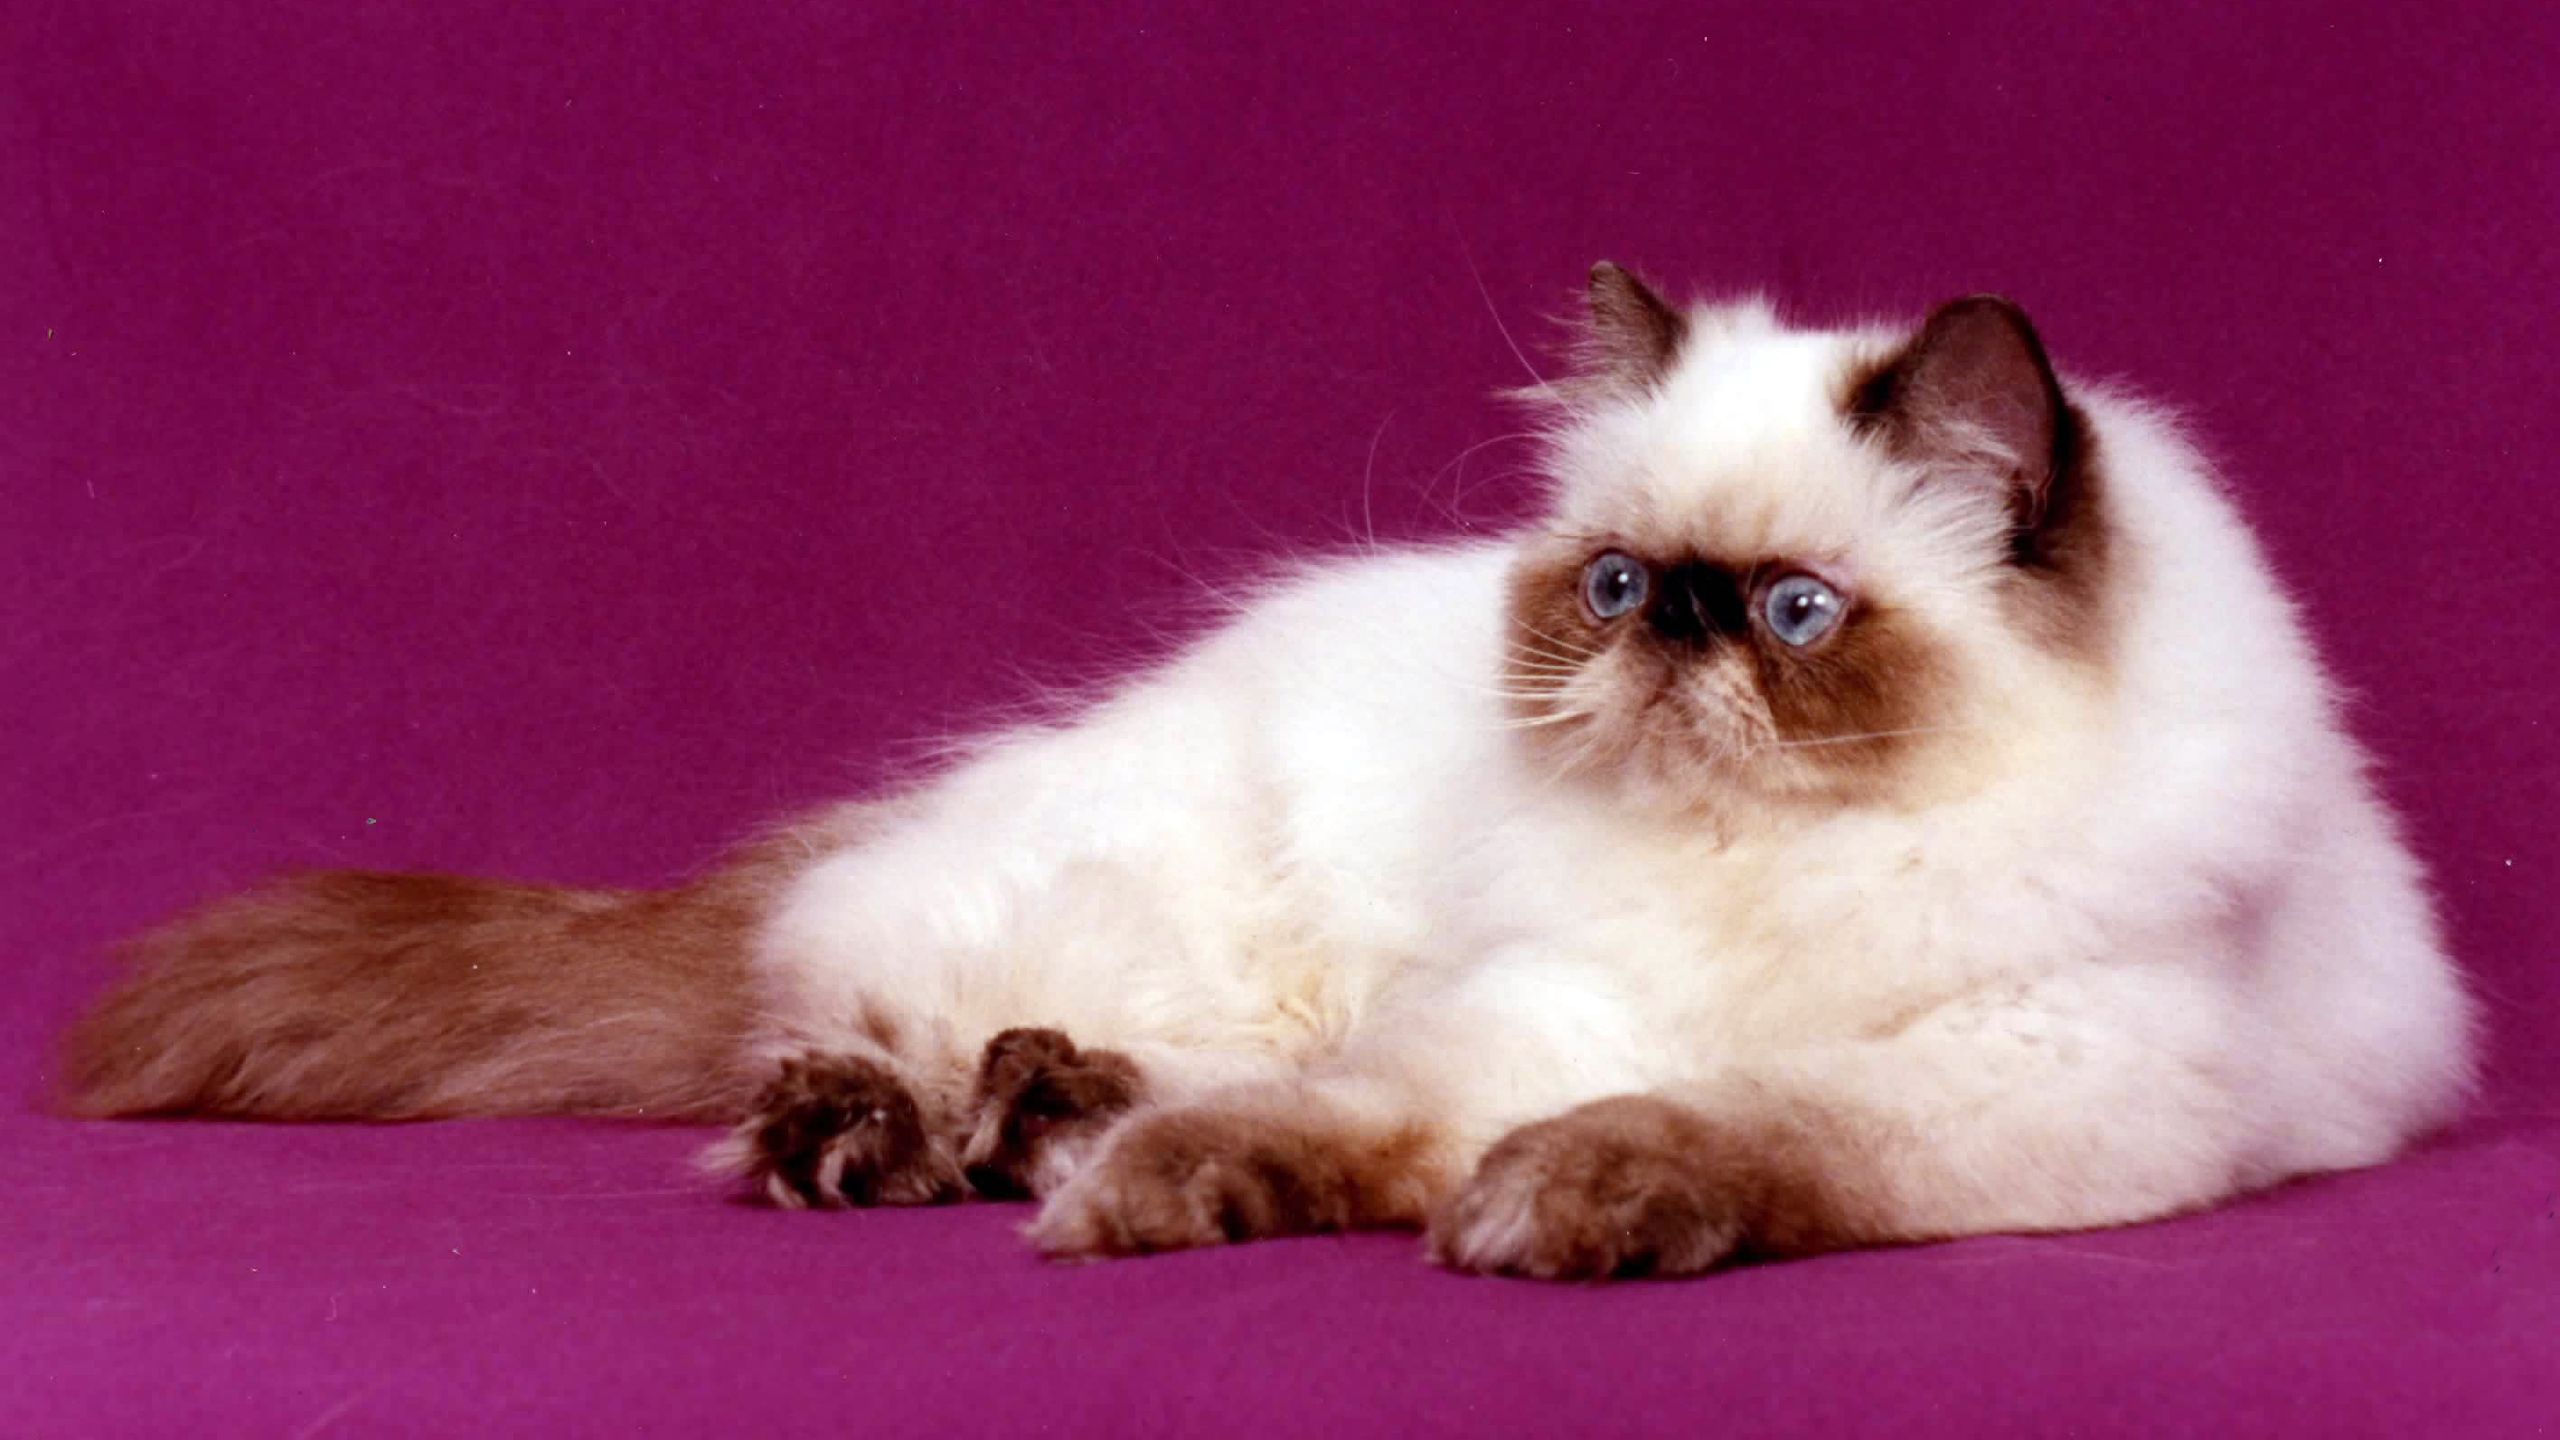 Persian Cat for 2560x1440 HDTV resolution